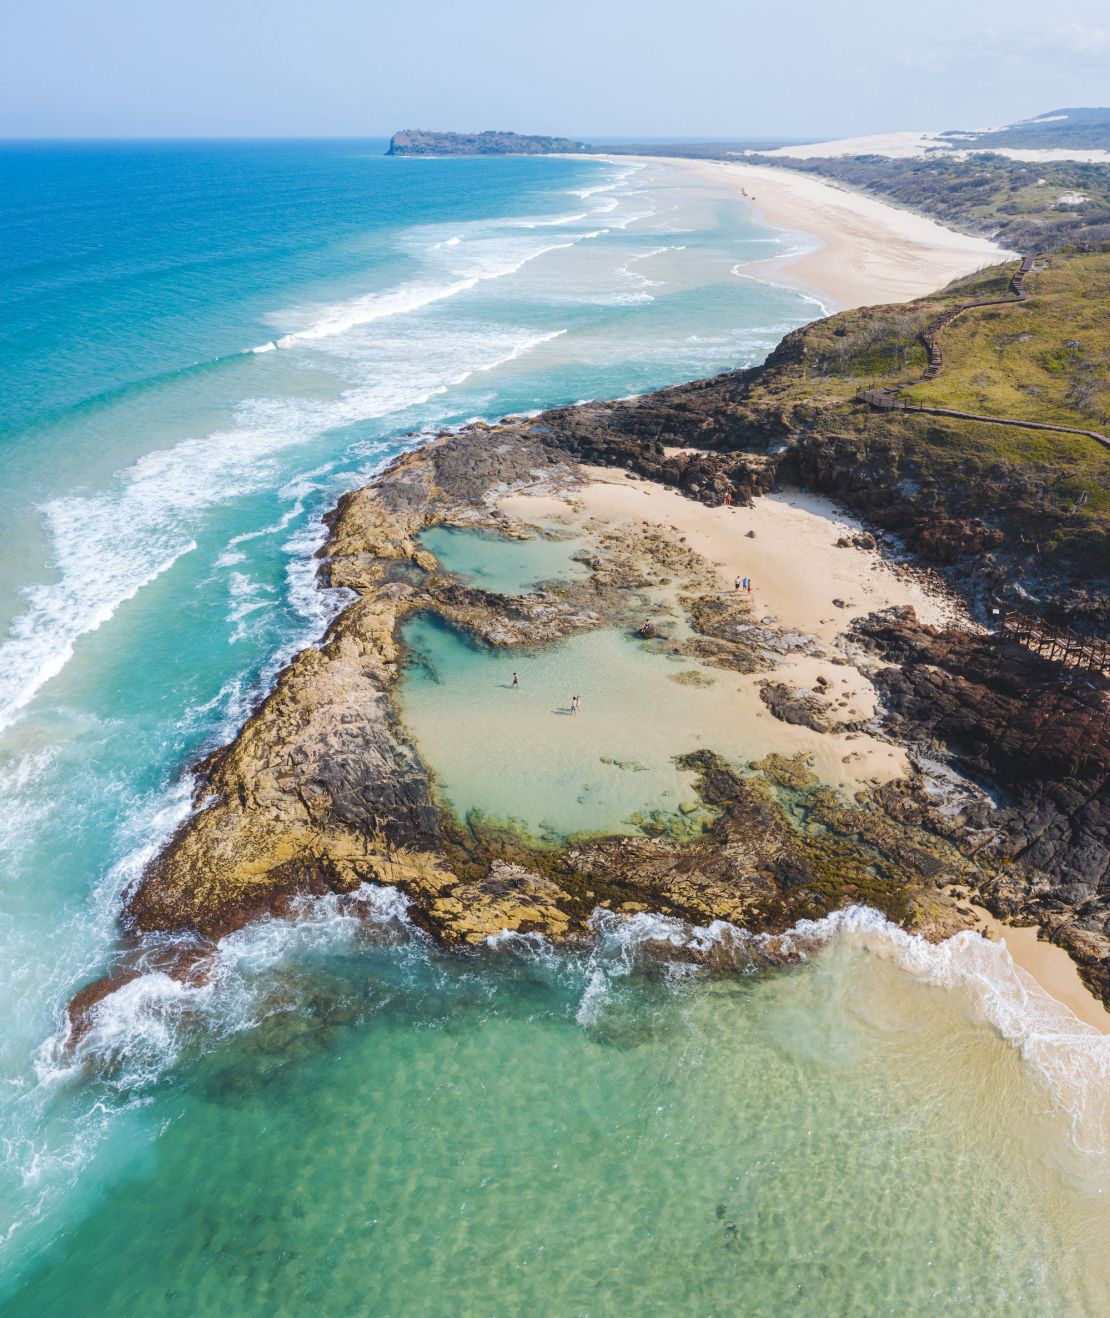 The island's famous Champagne Pools decorate its 75-mile beach.